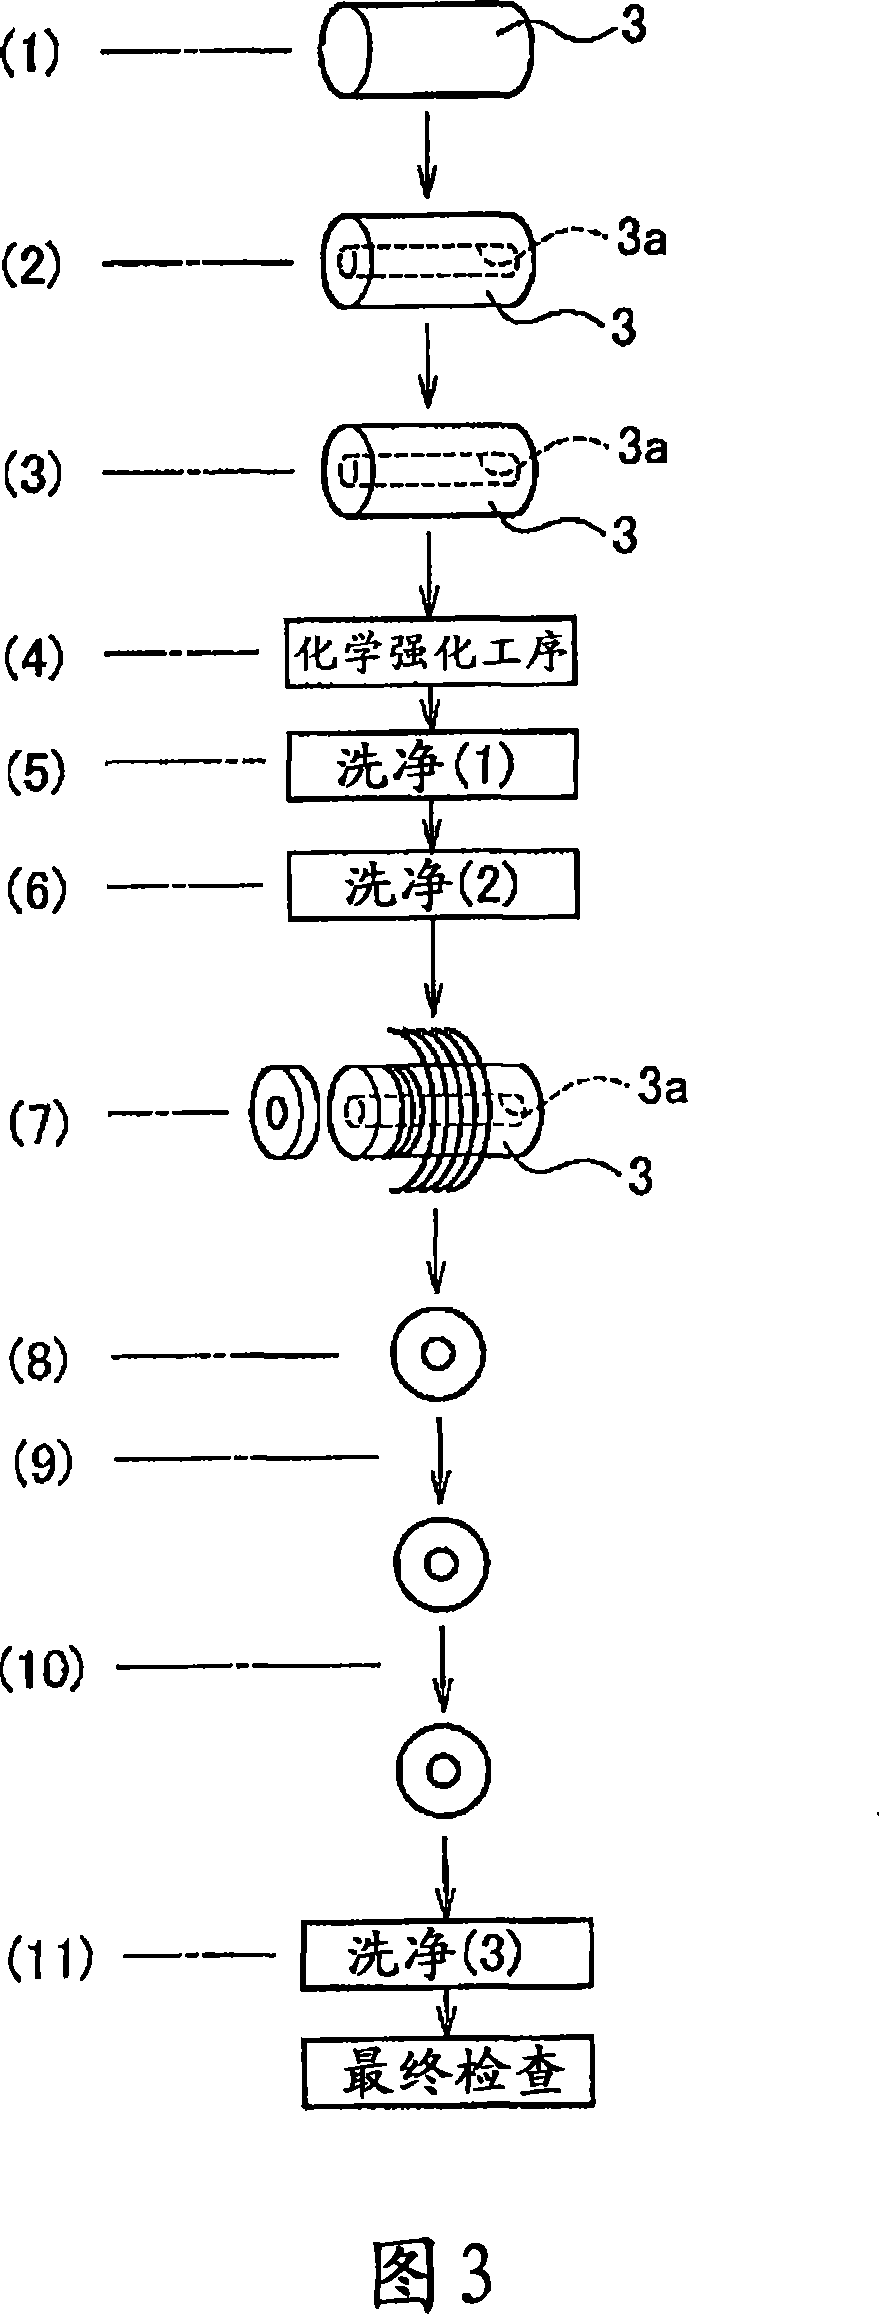 Glass substrate for magnetic disc, method for manufacturing such glass substrate, magnetic disc and method for manufacturing such magnetic disc